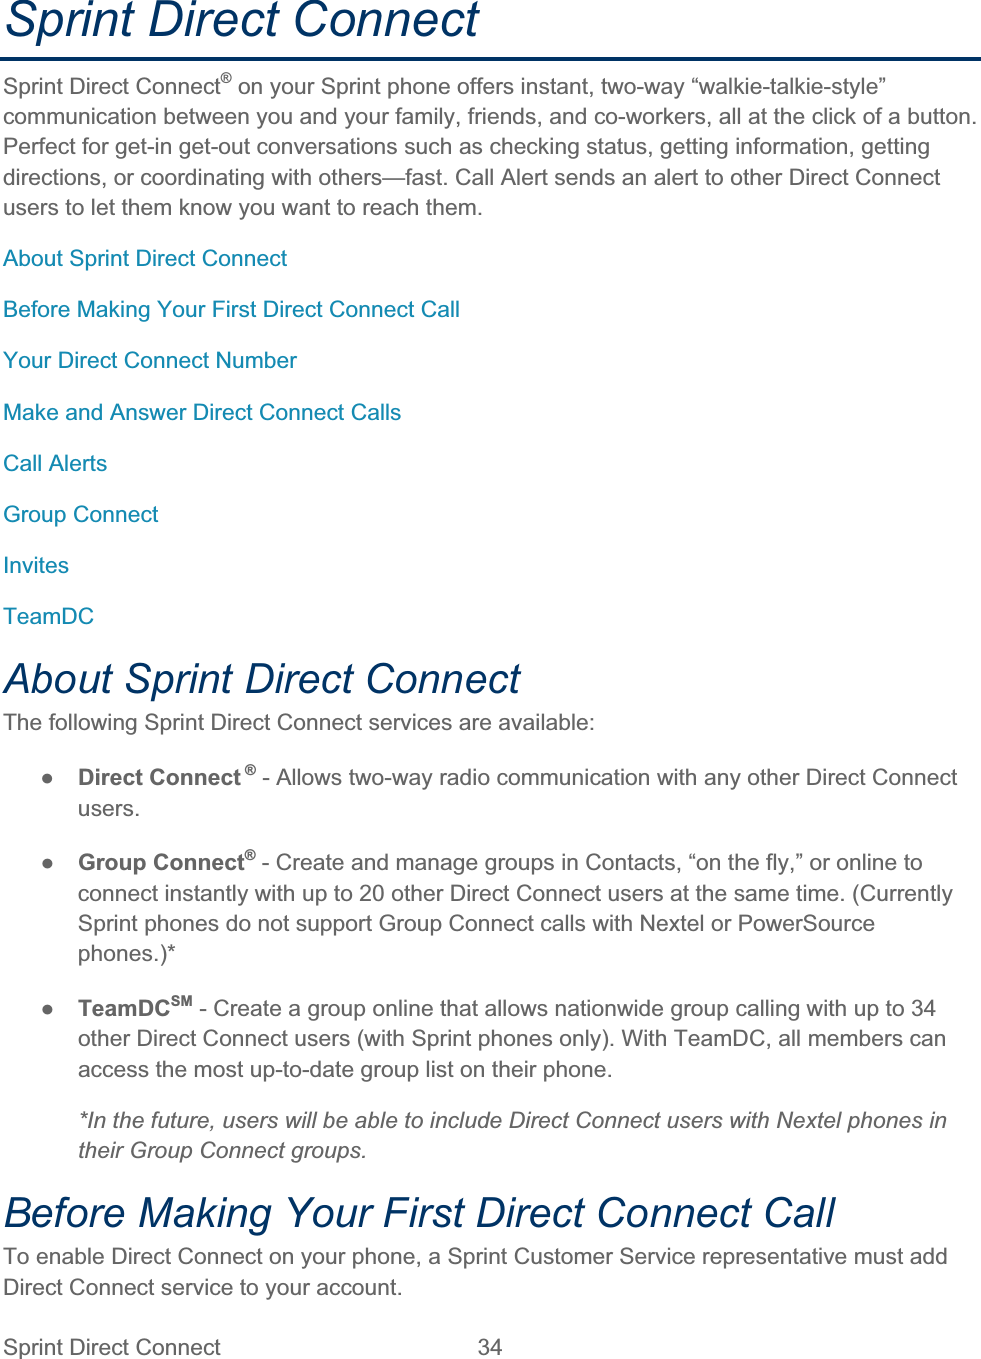 Sprint Direct Connect  34   Sprint Direct Connect Sprint Direct Connect® on your Sprint phone offers instant, two-way “walkie-talkie-style” communication between you and your family, friends, and co-workers, all at the click of a button. Perfect for get-in get-out conversations such as checking status, getting information, getting directions, or coordinating with others—fast. Call Alert sends an alert to other Direct Connect users to let them know you want to reach them. About Sprint Direct Connect Before Making Your First Direct Connect Call Your Direct Connect Number Make and Answer Direct Connect Calls Call Alerts Group Connect InvitesTeamDCAbout Sprint Direct Connect The following Sprint Direct Connect services are available: ŏDirect Connect ® - Allows two-way radio communication with any other Direct Connect users.ŏGroup Connect® - Create and manage groups in Contacts, “on the fly,” or online to connect instantly with up to 20 other Direct Connect users at the same time. (Currently Sprint phones do not support Group Connect calls with Nextel or PowerSource phones.)*ŏTeamDCSM - Create a group online that allows nationwide group calling with up to 34 other Direct Connect users (with Sprint phones only). With TeamDC, all members can access the most up-to-date group list on their phone. *In the future, users will be able to include Direct Connect users with Nextel phones in their Group Connect groups. Before Making Your First Direct Connect Call To enable Direct Connect on your phone, a Sprint Customer Service representative must add Direct Connect service to your account. 